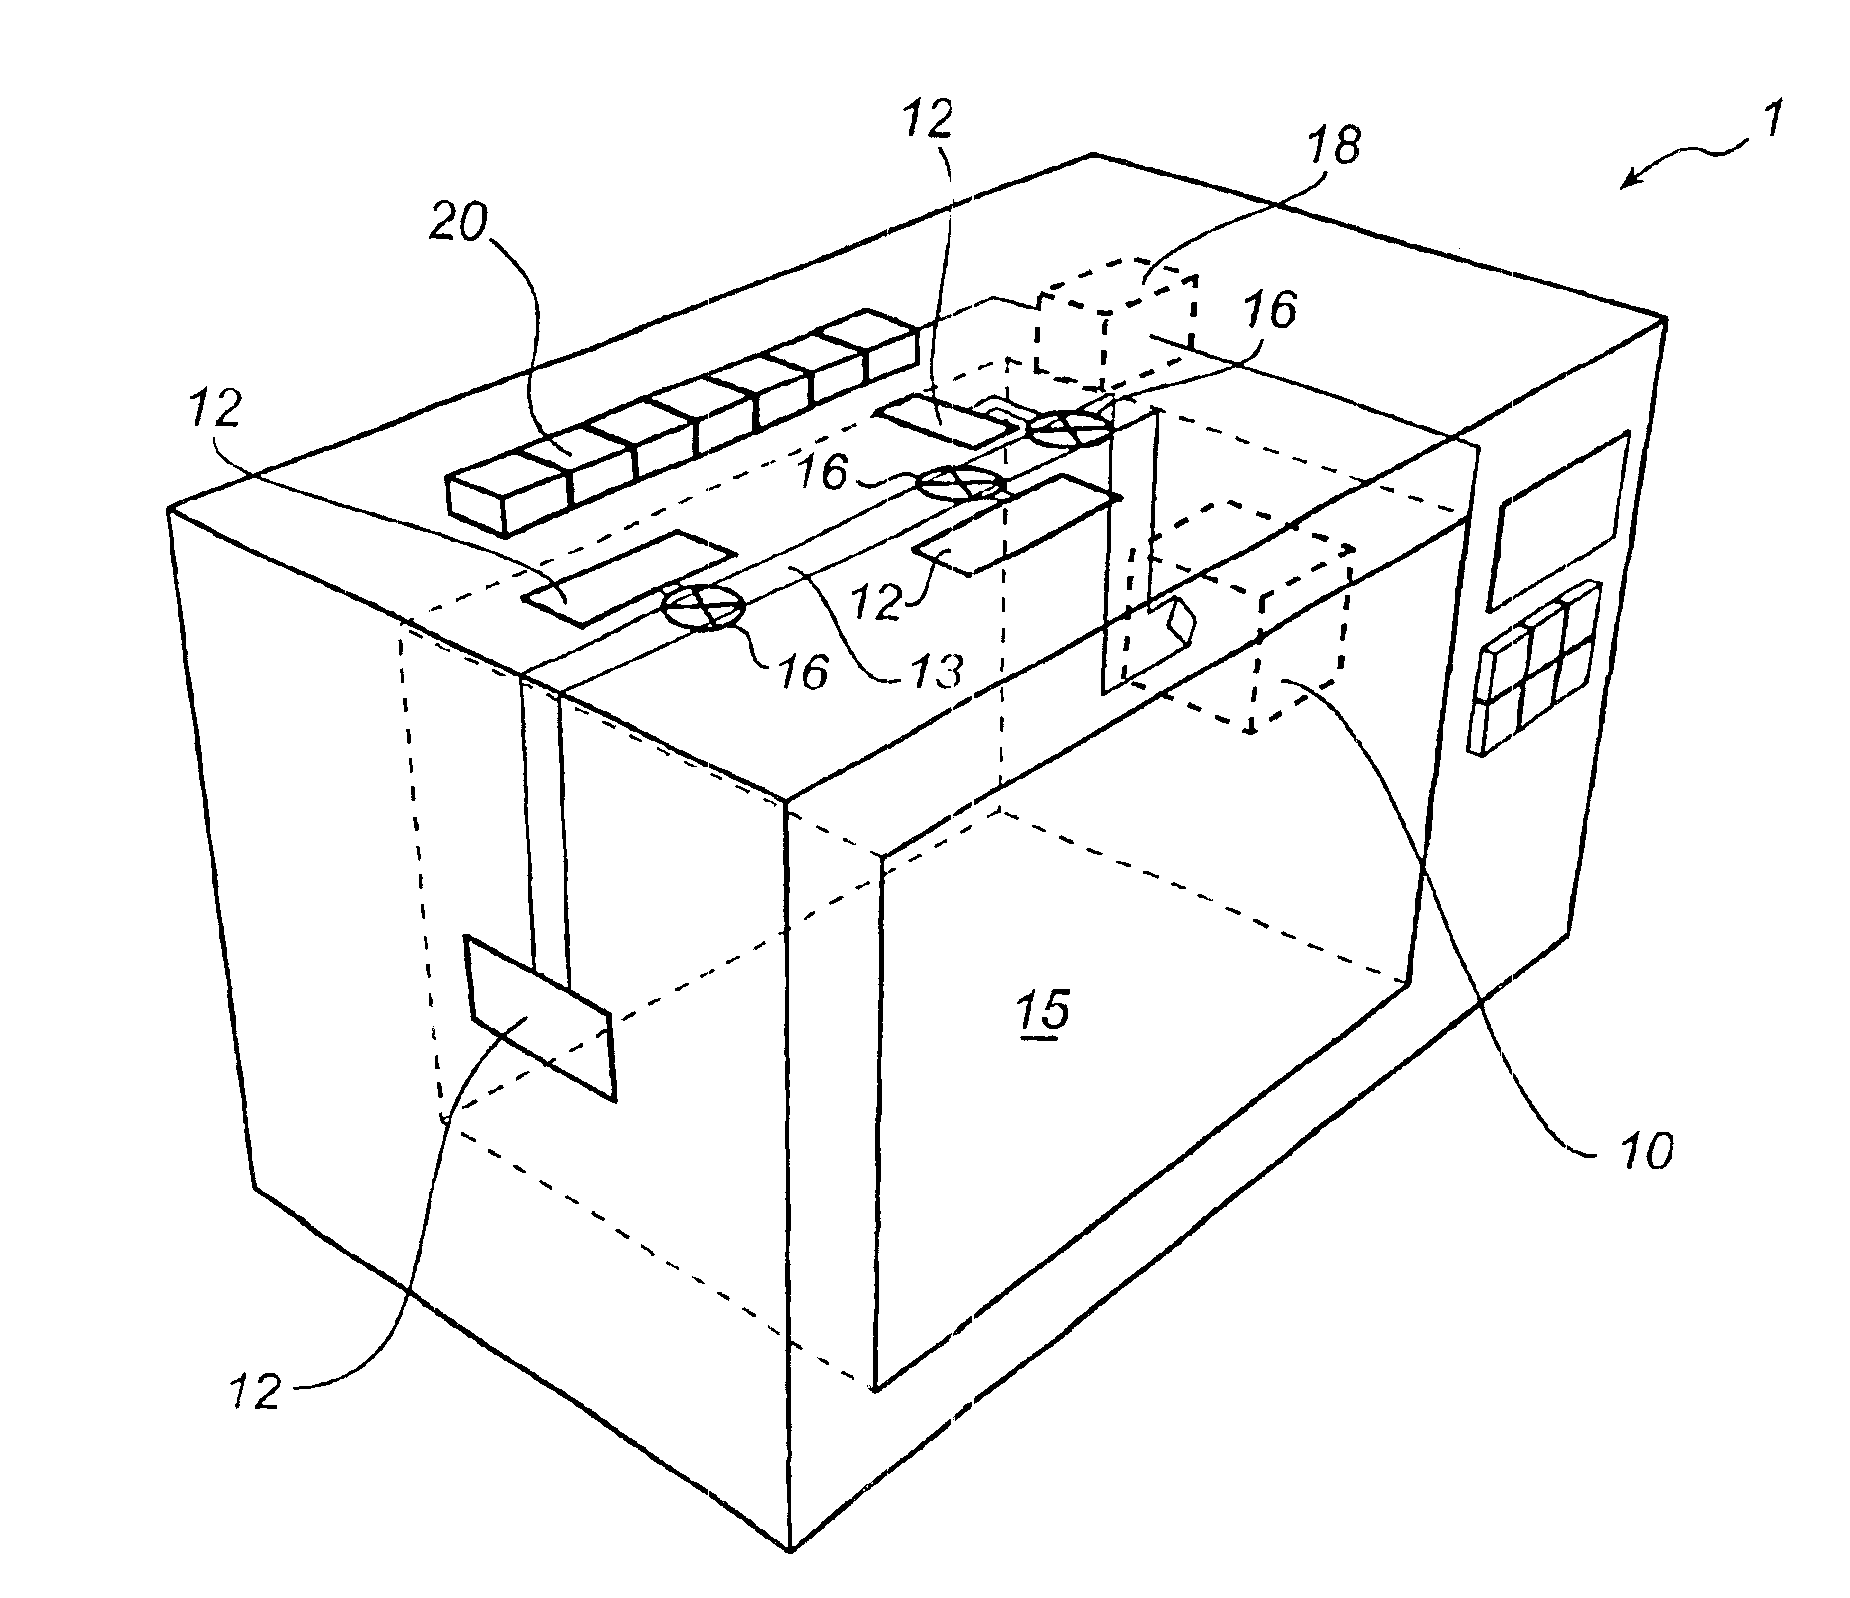 Method and apparatus for uniform heating in a microwave oven